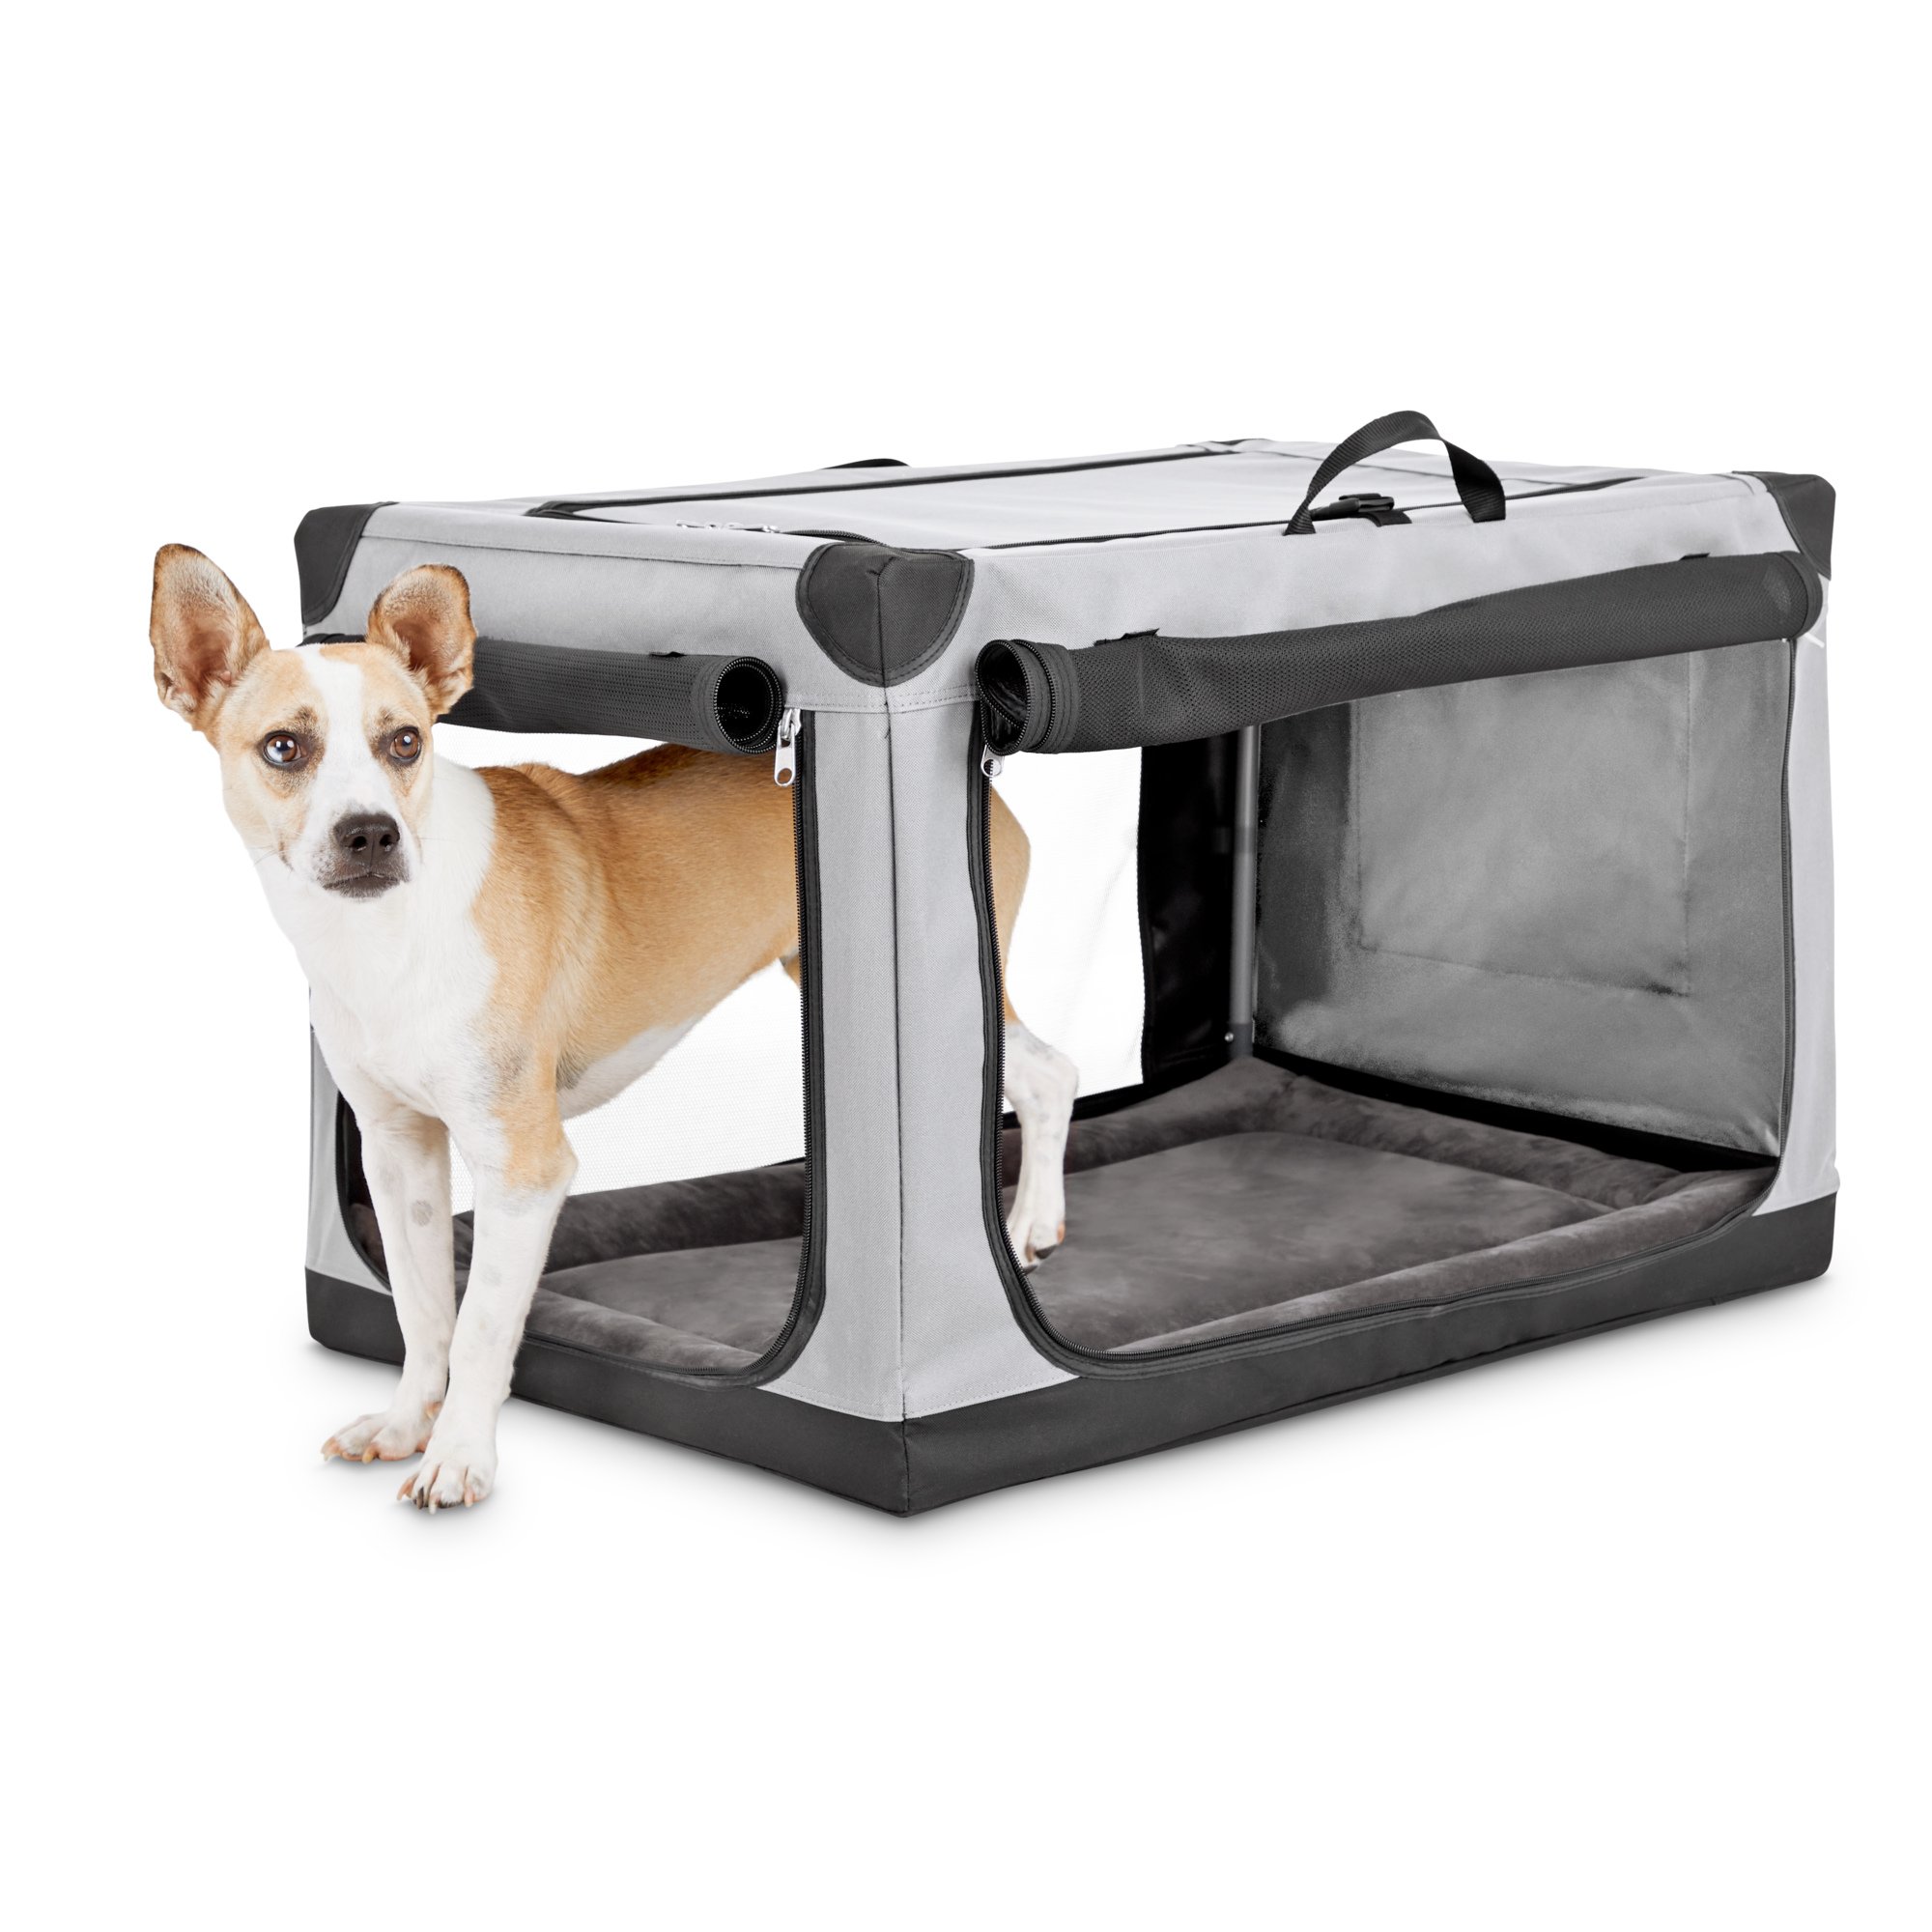 sport pet travel pop up crate red for dogs